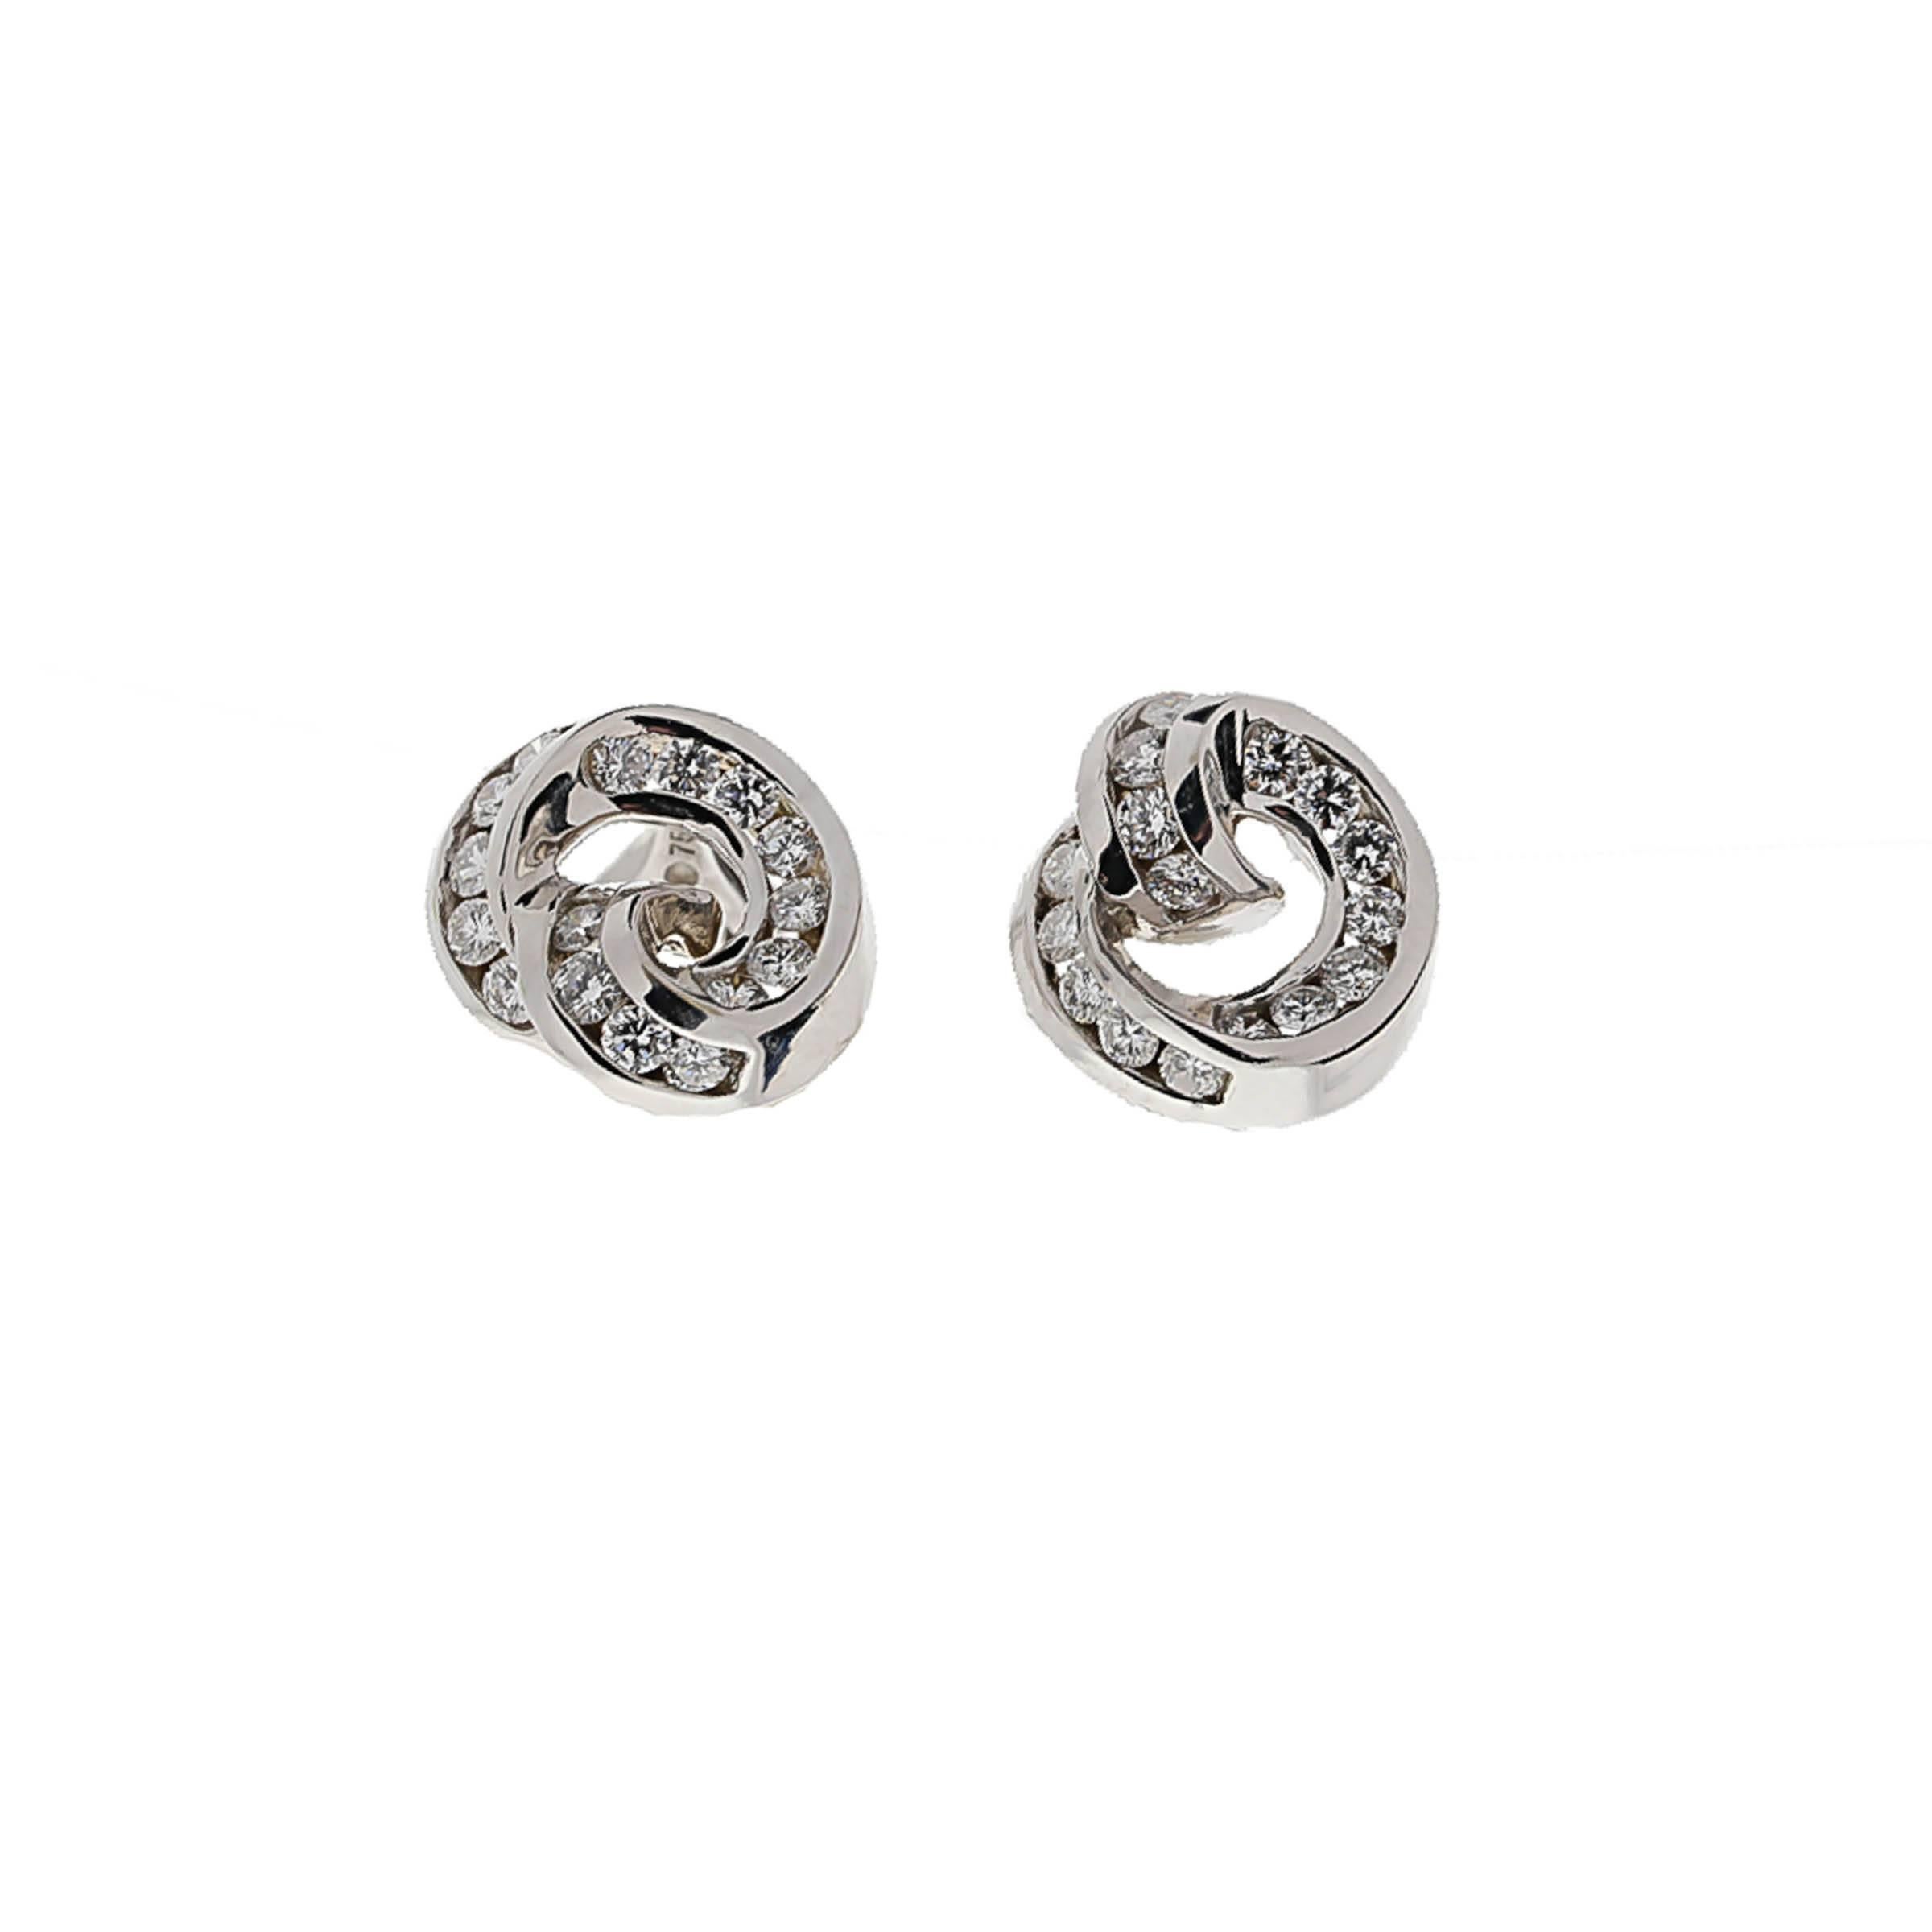 18K round shape swirl earrings with omega clip. The diamonds weigh combined 0.68 carat.
The earrings have an omega clip. Post can be added.